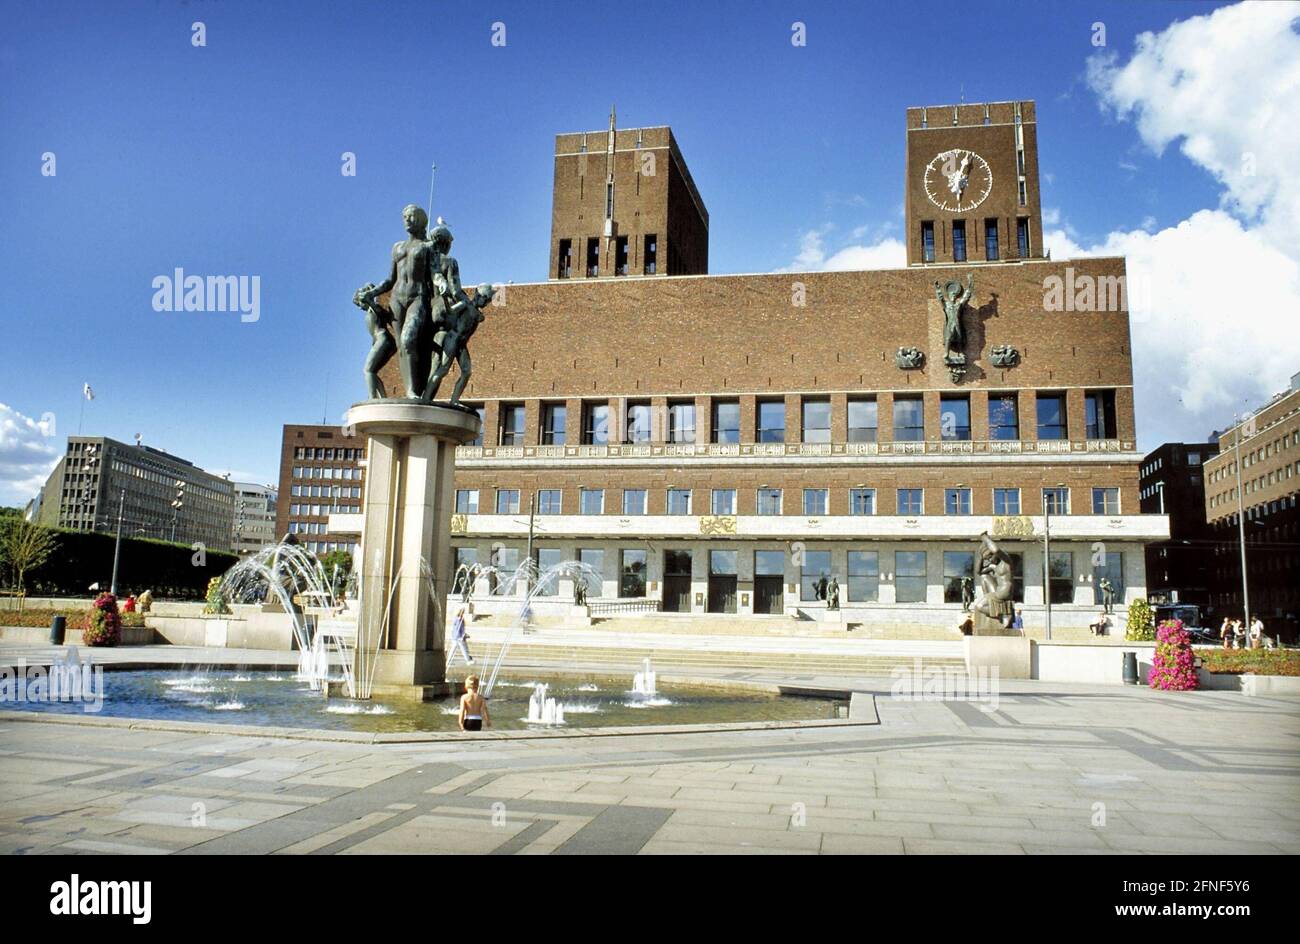 The town hall opened in 1950 on the occasion of Oslo's 900th anniversary. [automated translation] Stock Photo